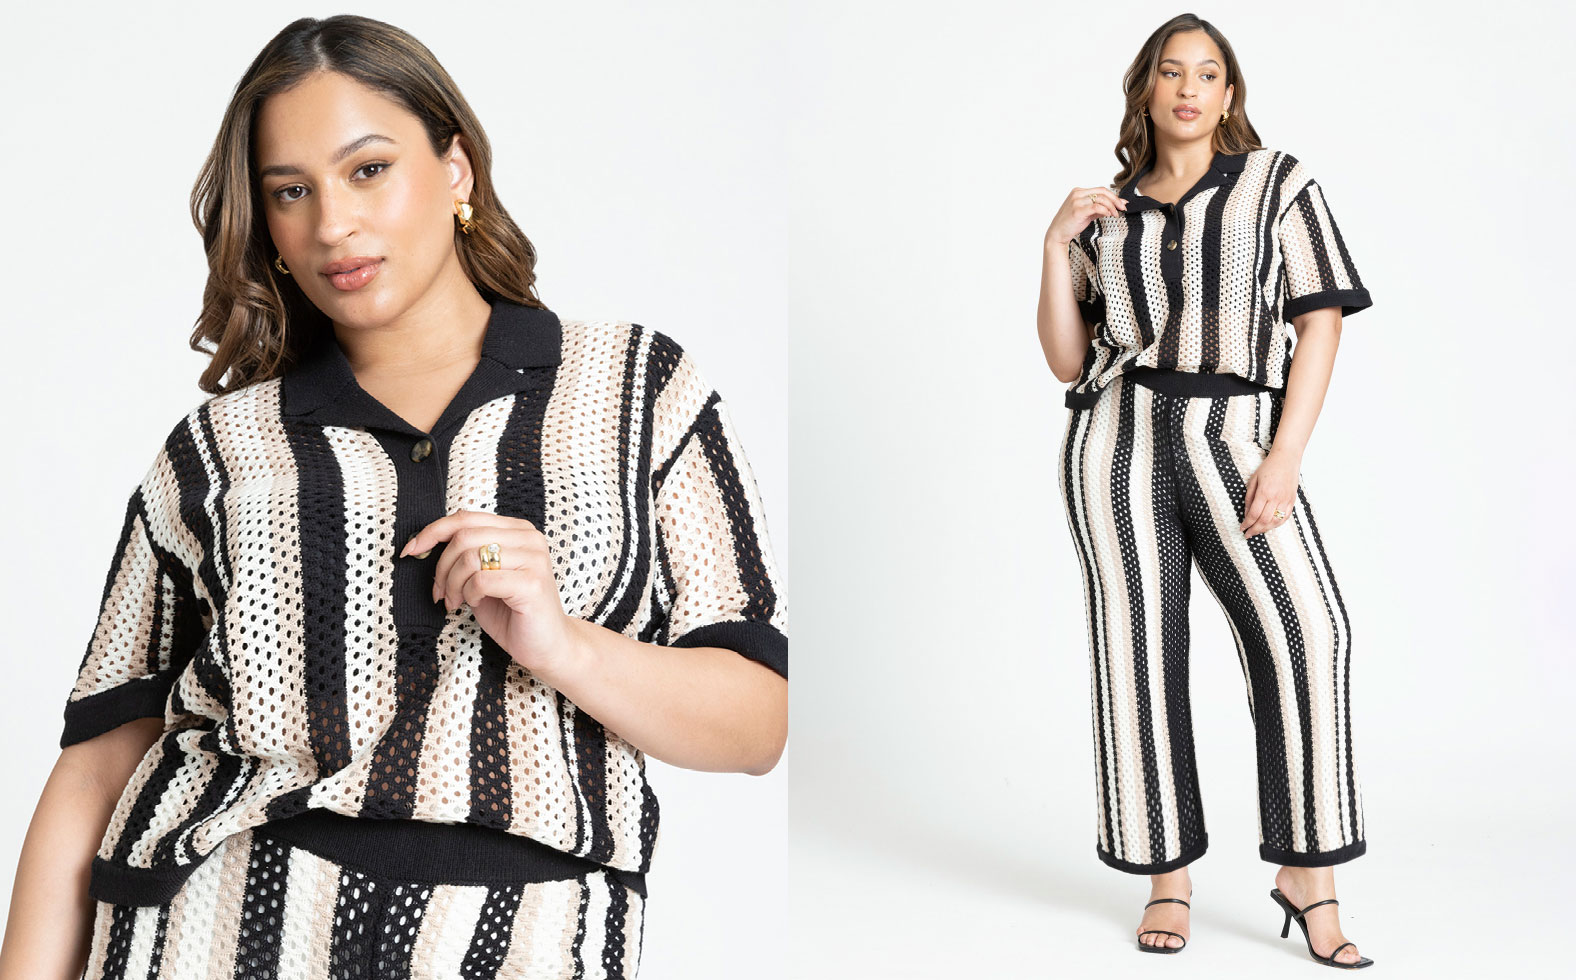 Find Best Plus Size Clothing Suppliers to Sell Online